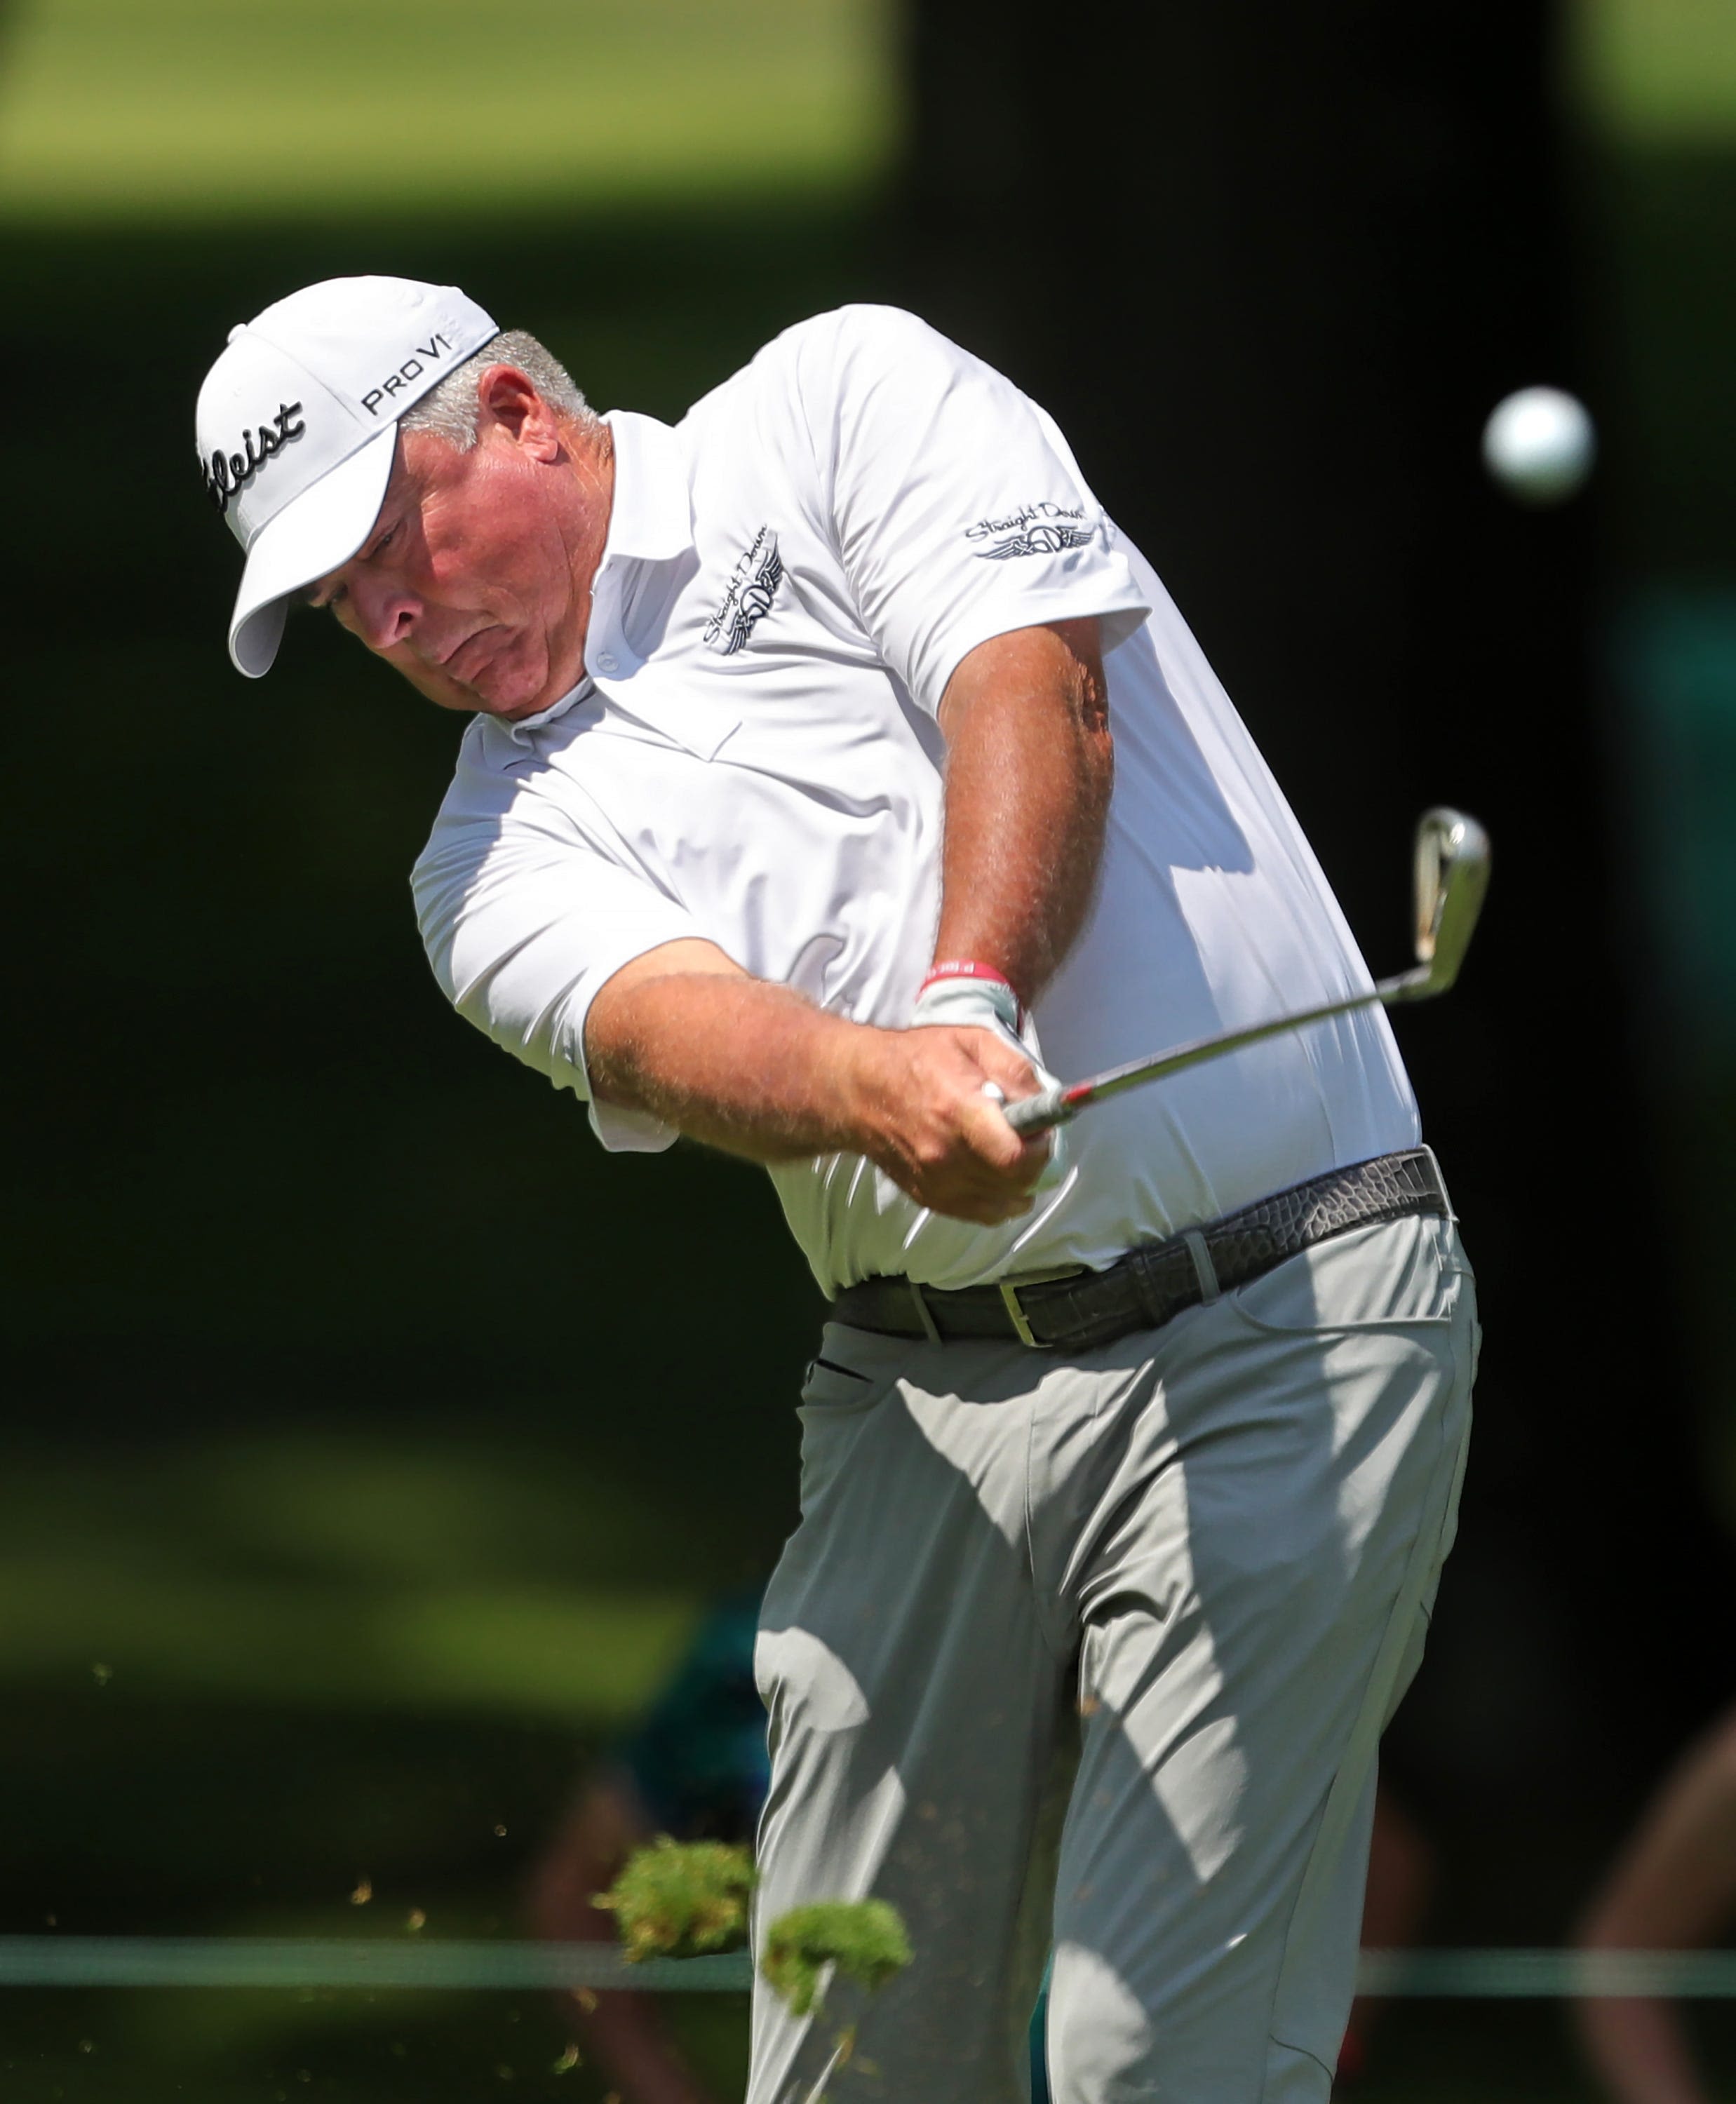 Kenny Perry competes at Firestone CC with wife in mind after Alzheimer's diagnosis